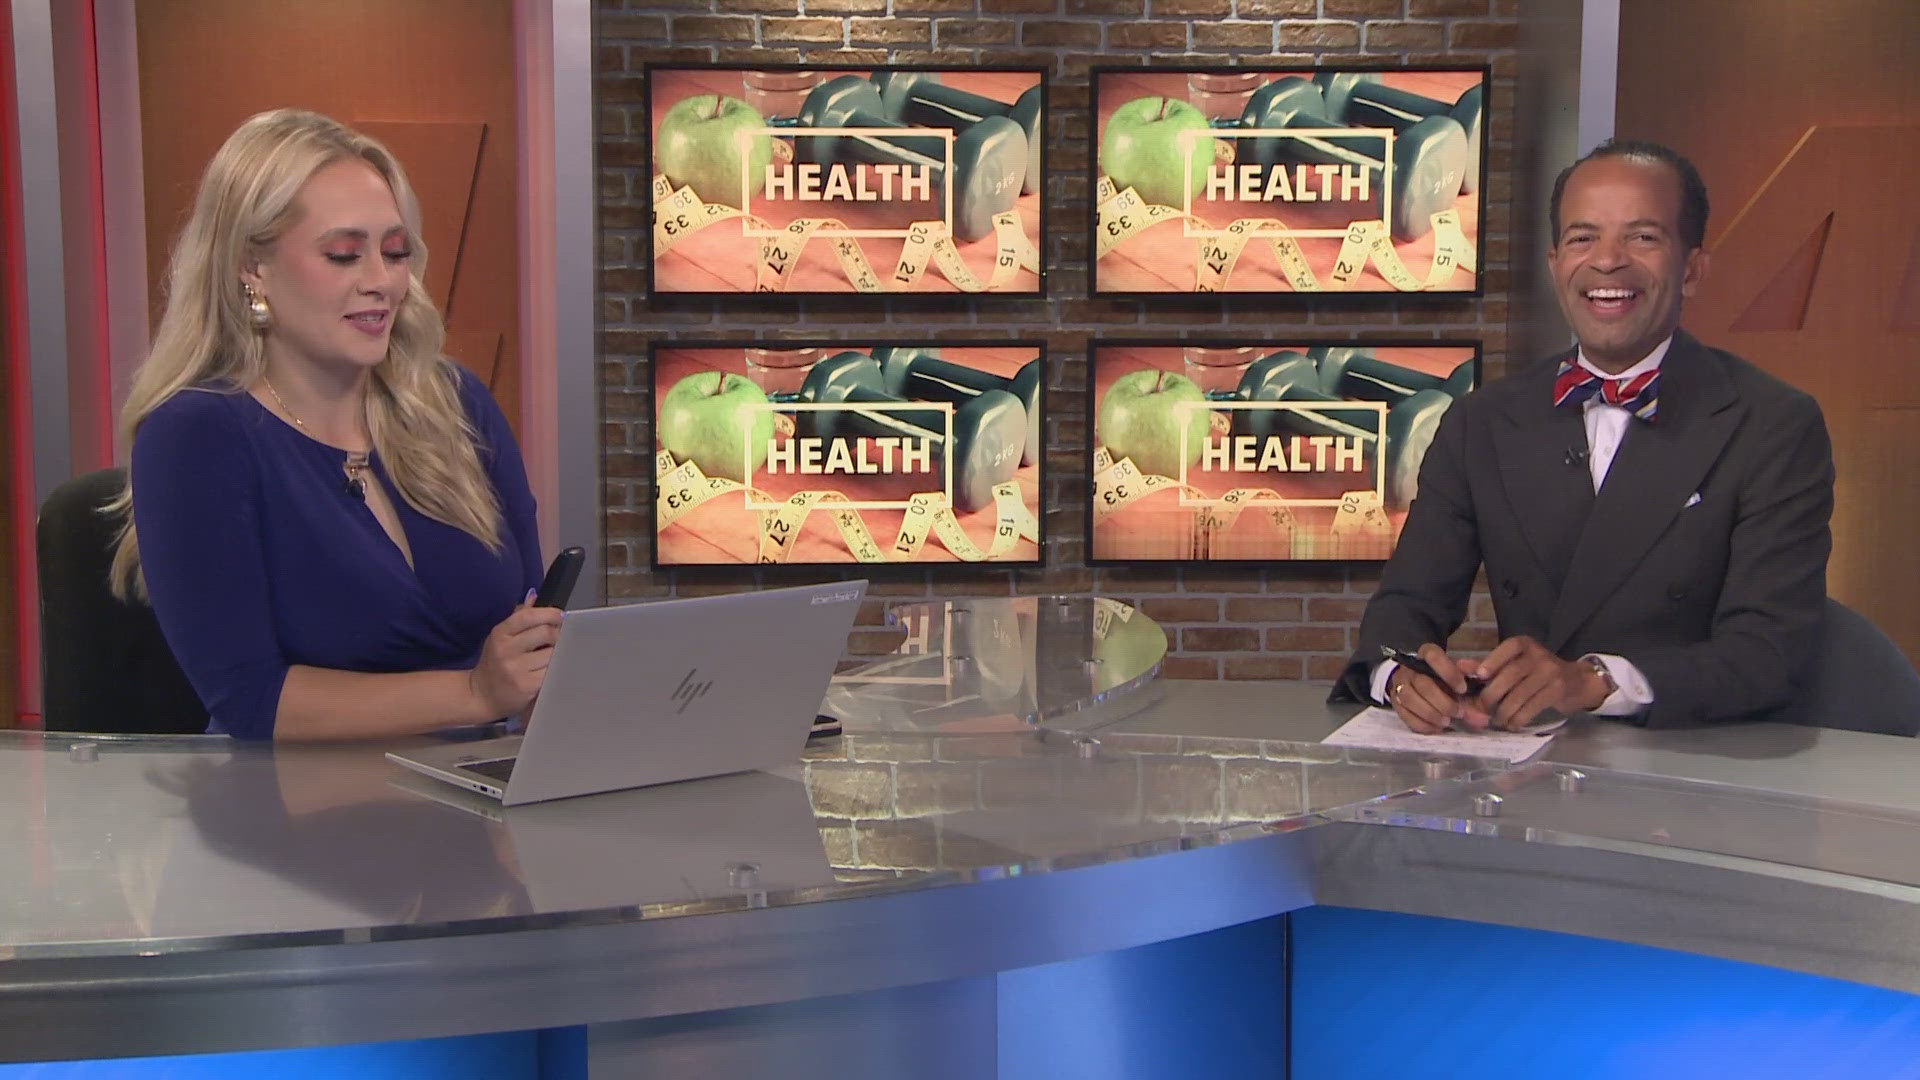 WWL Louisiana's Health Expert Dr. Corey Hebert discusses menopause and foods you should avoid, anger survey, and more.